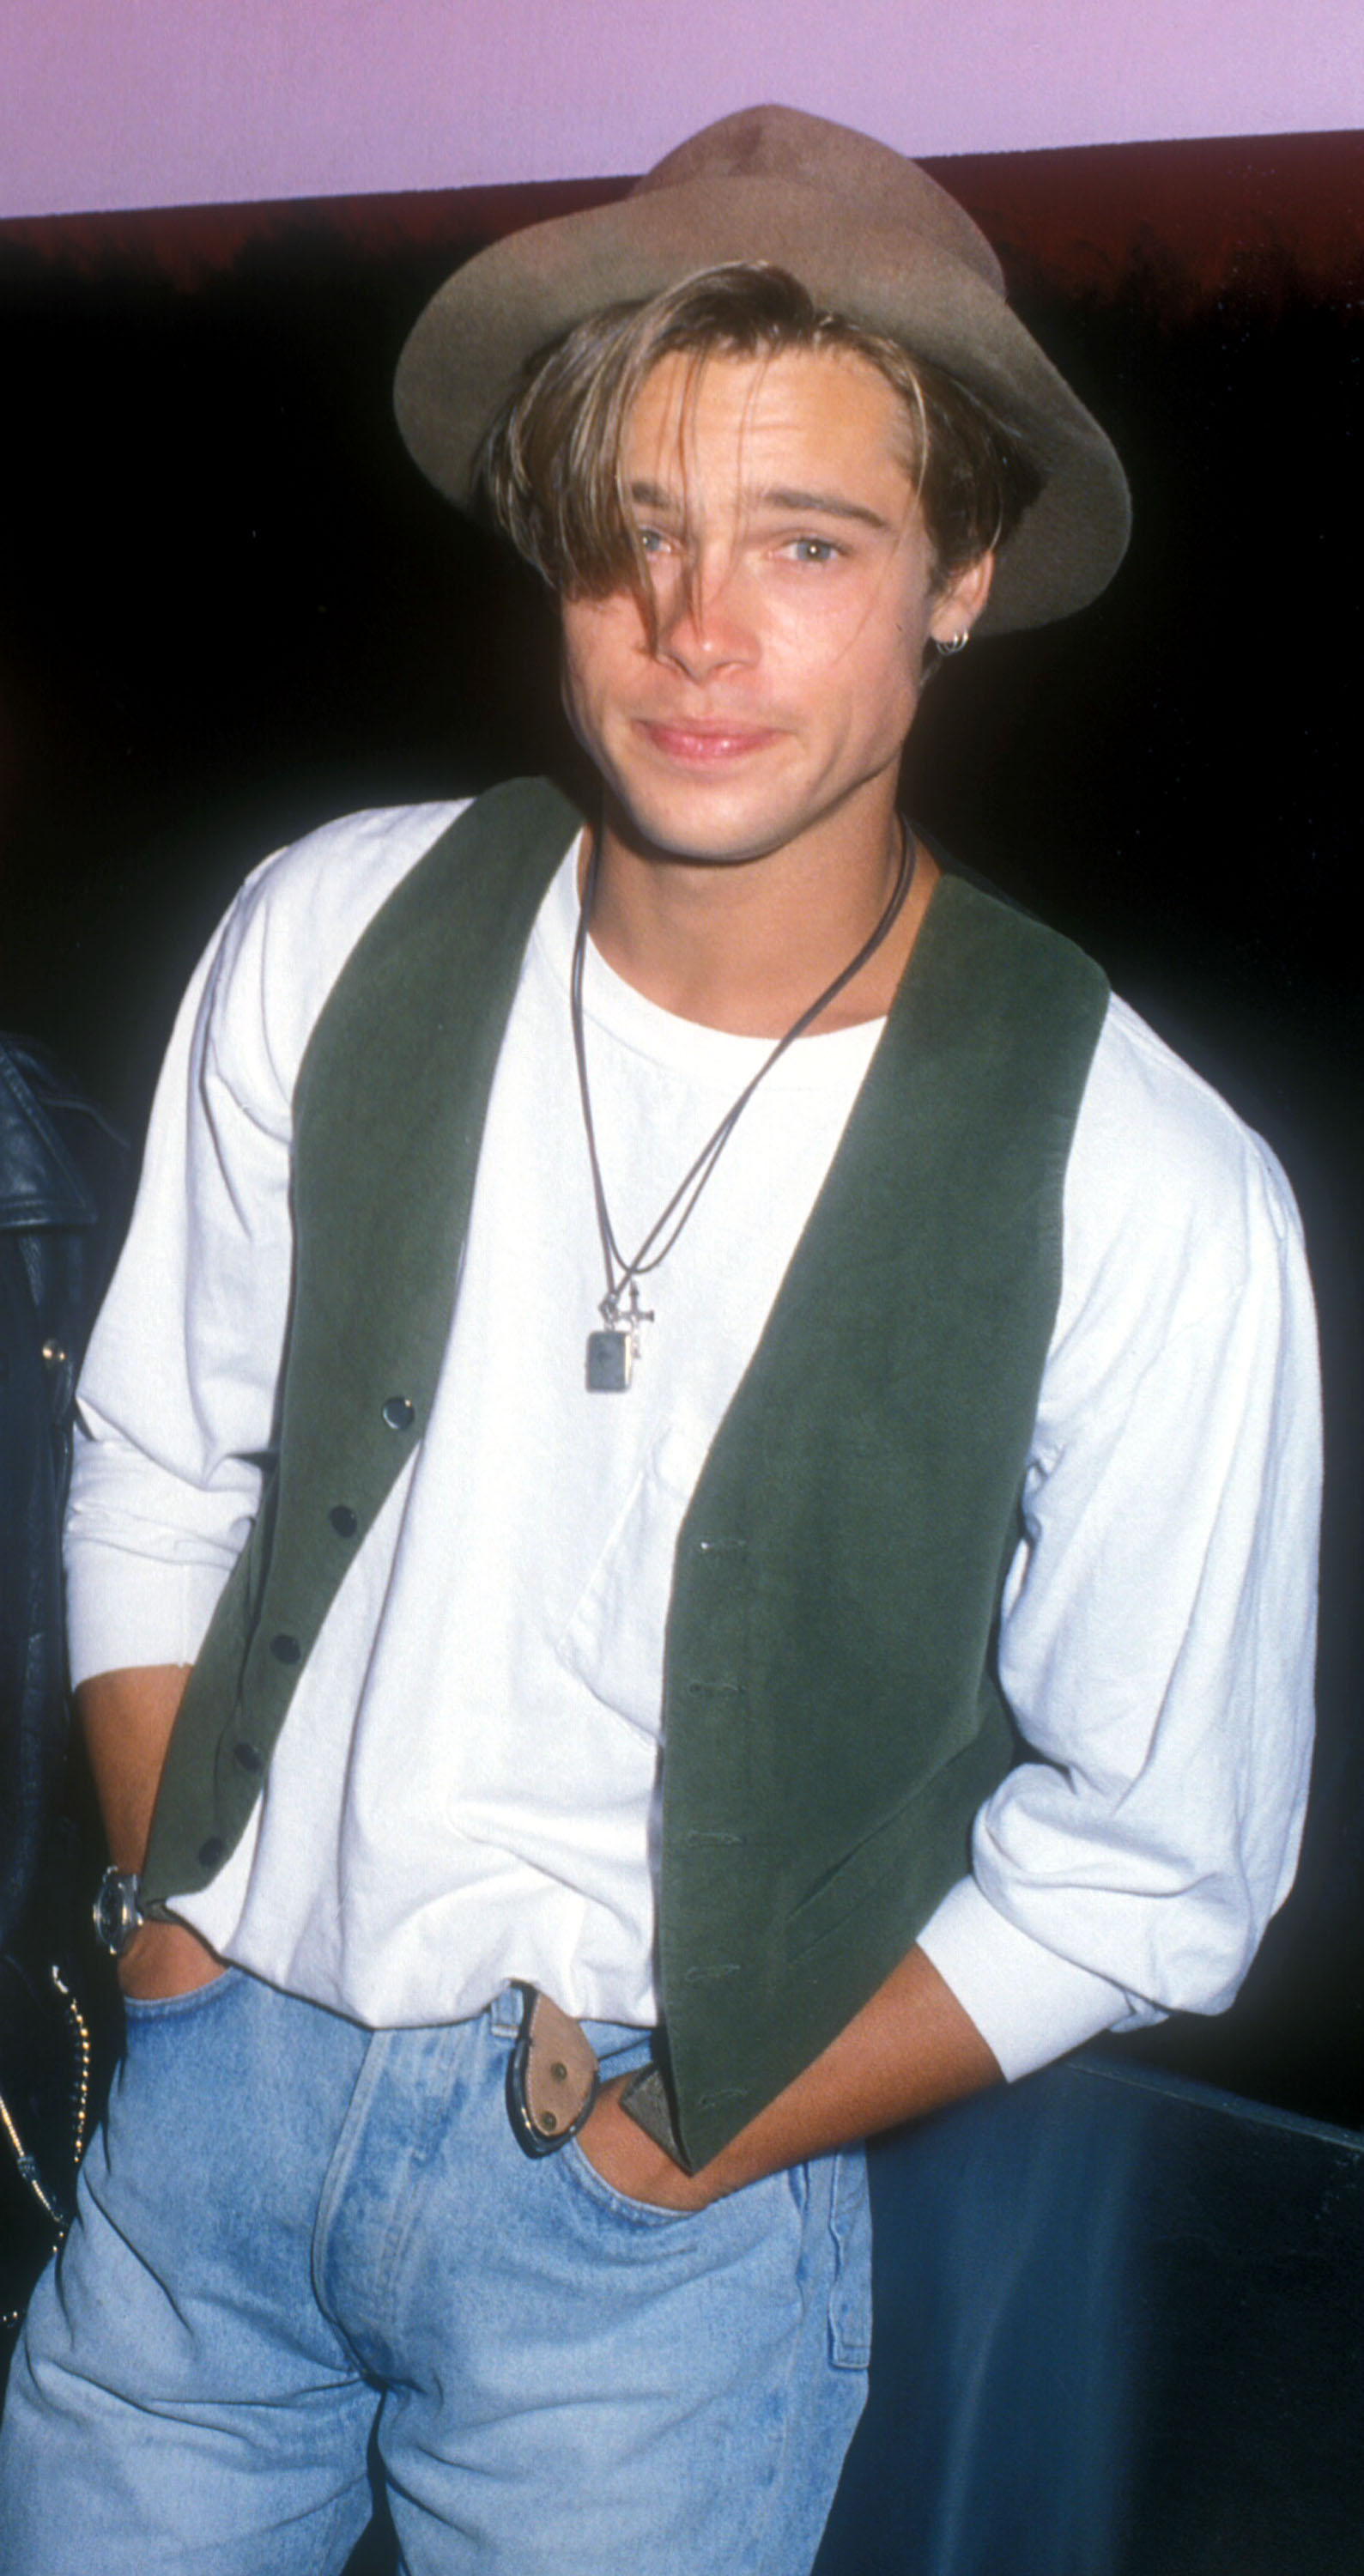 Brad Pitt poses in 1989 | Source: Getty Images